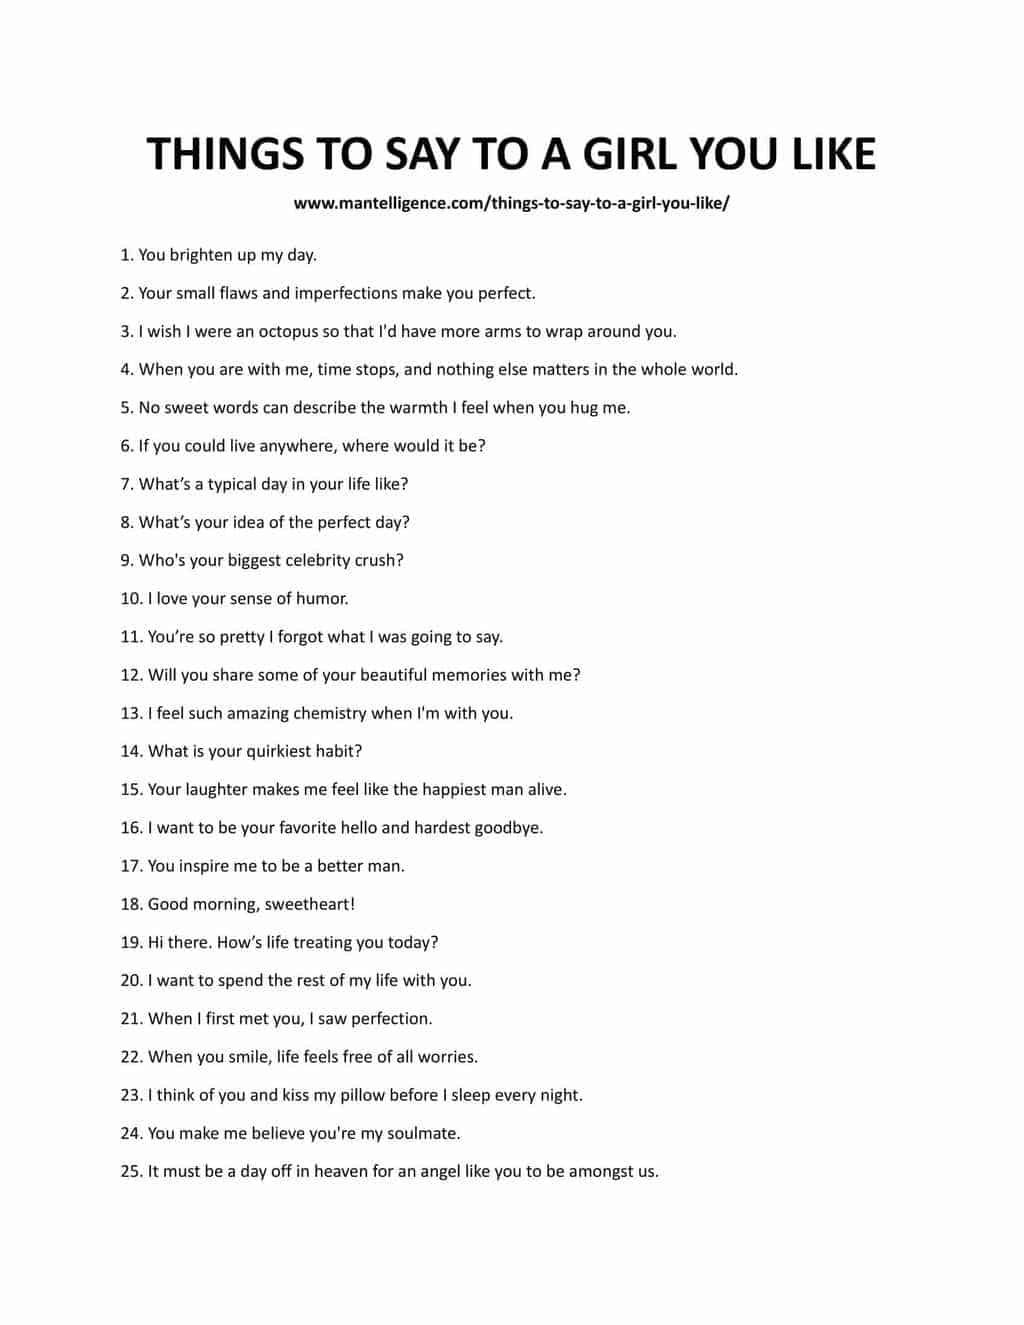 Downloadable list of things to say